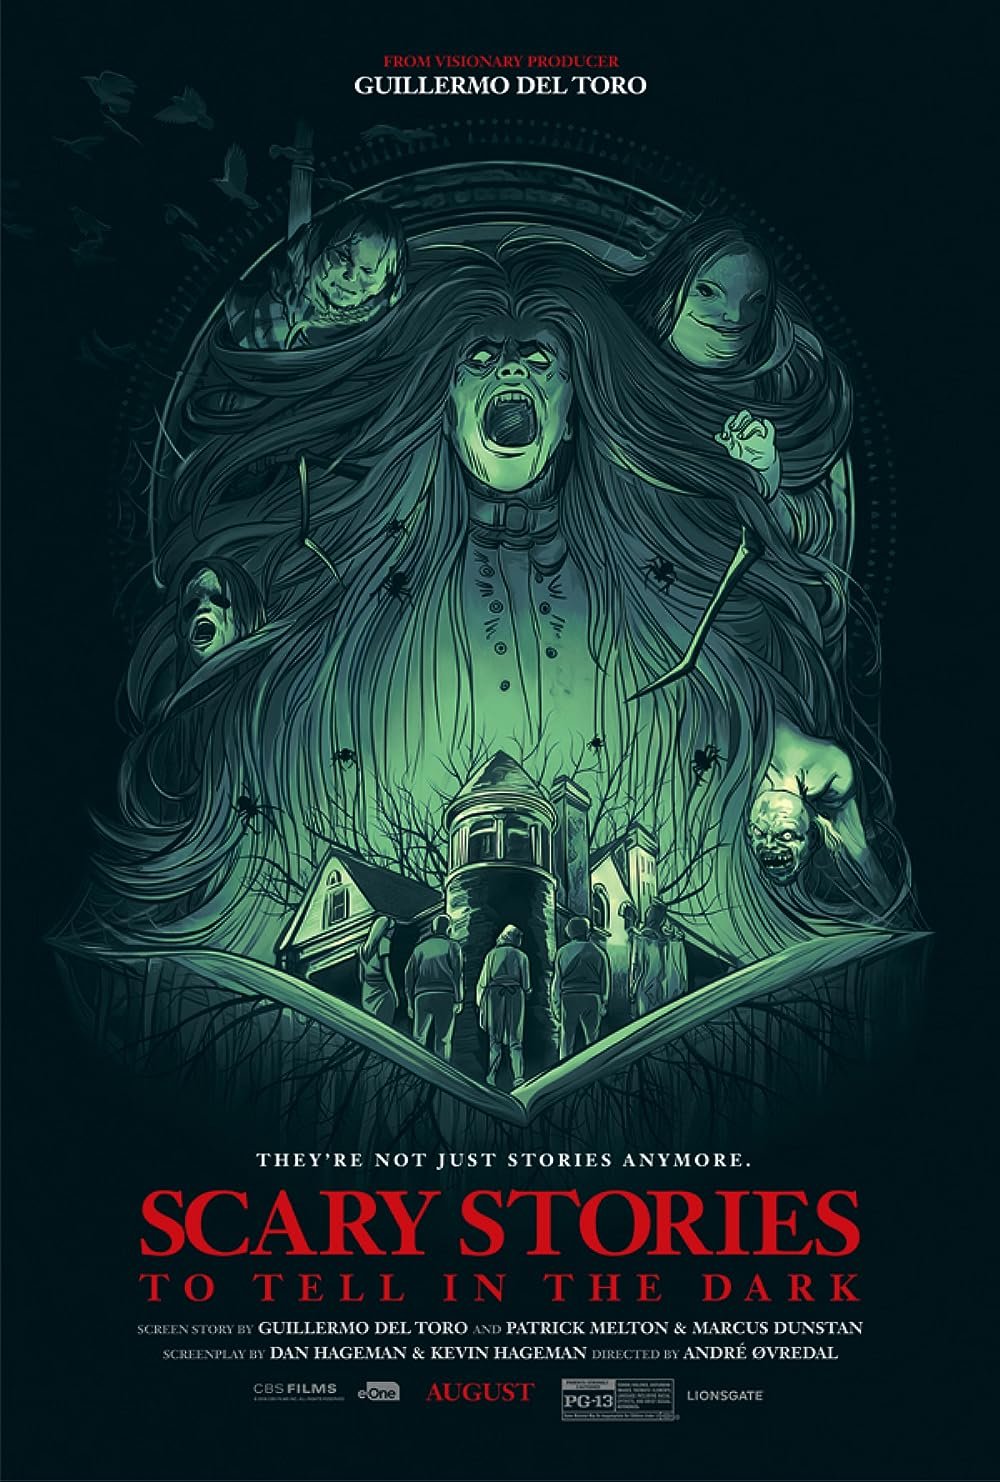 Scary Stories to Tell in the Dark (2019) - Score Mixer &amp; Additional Recording Engineer